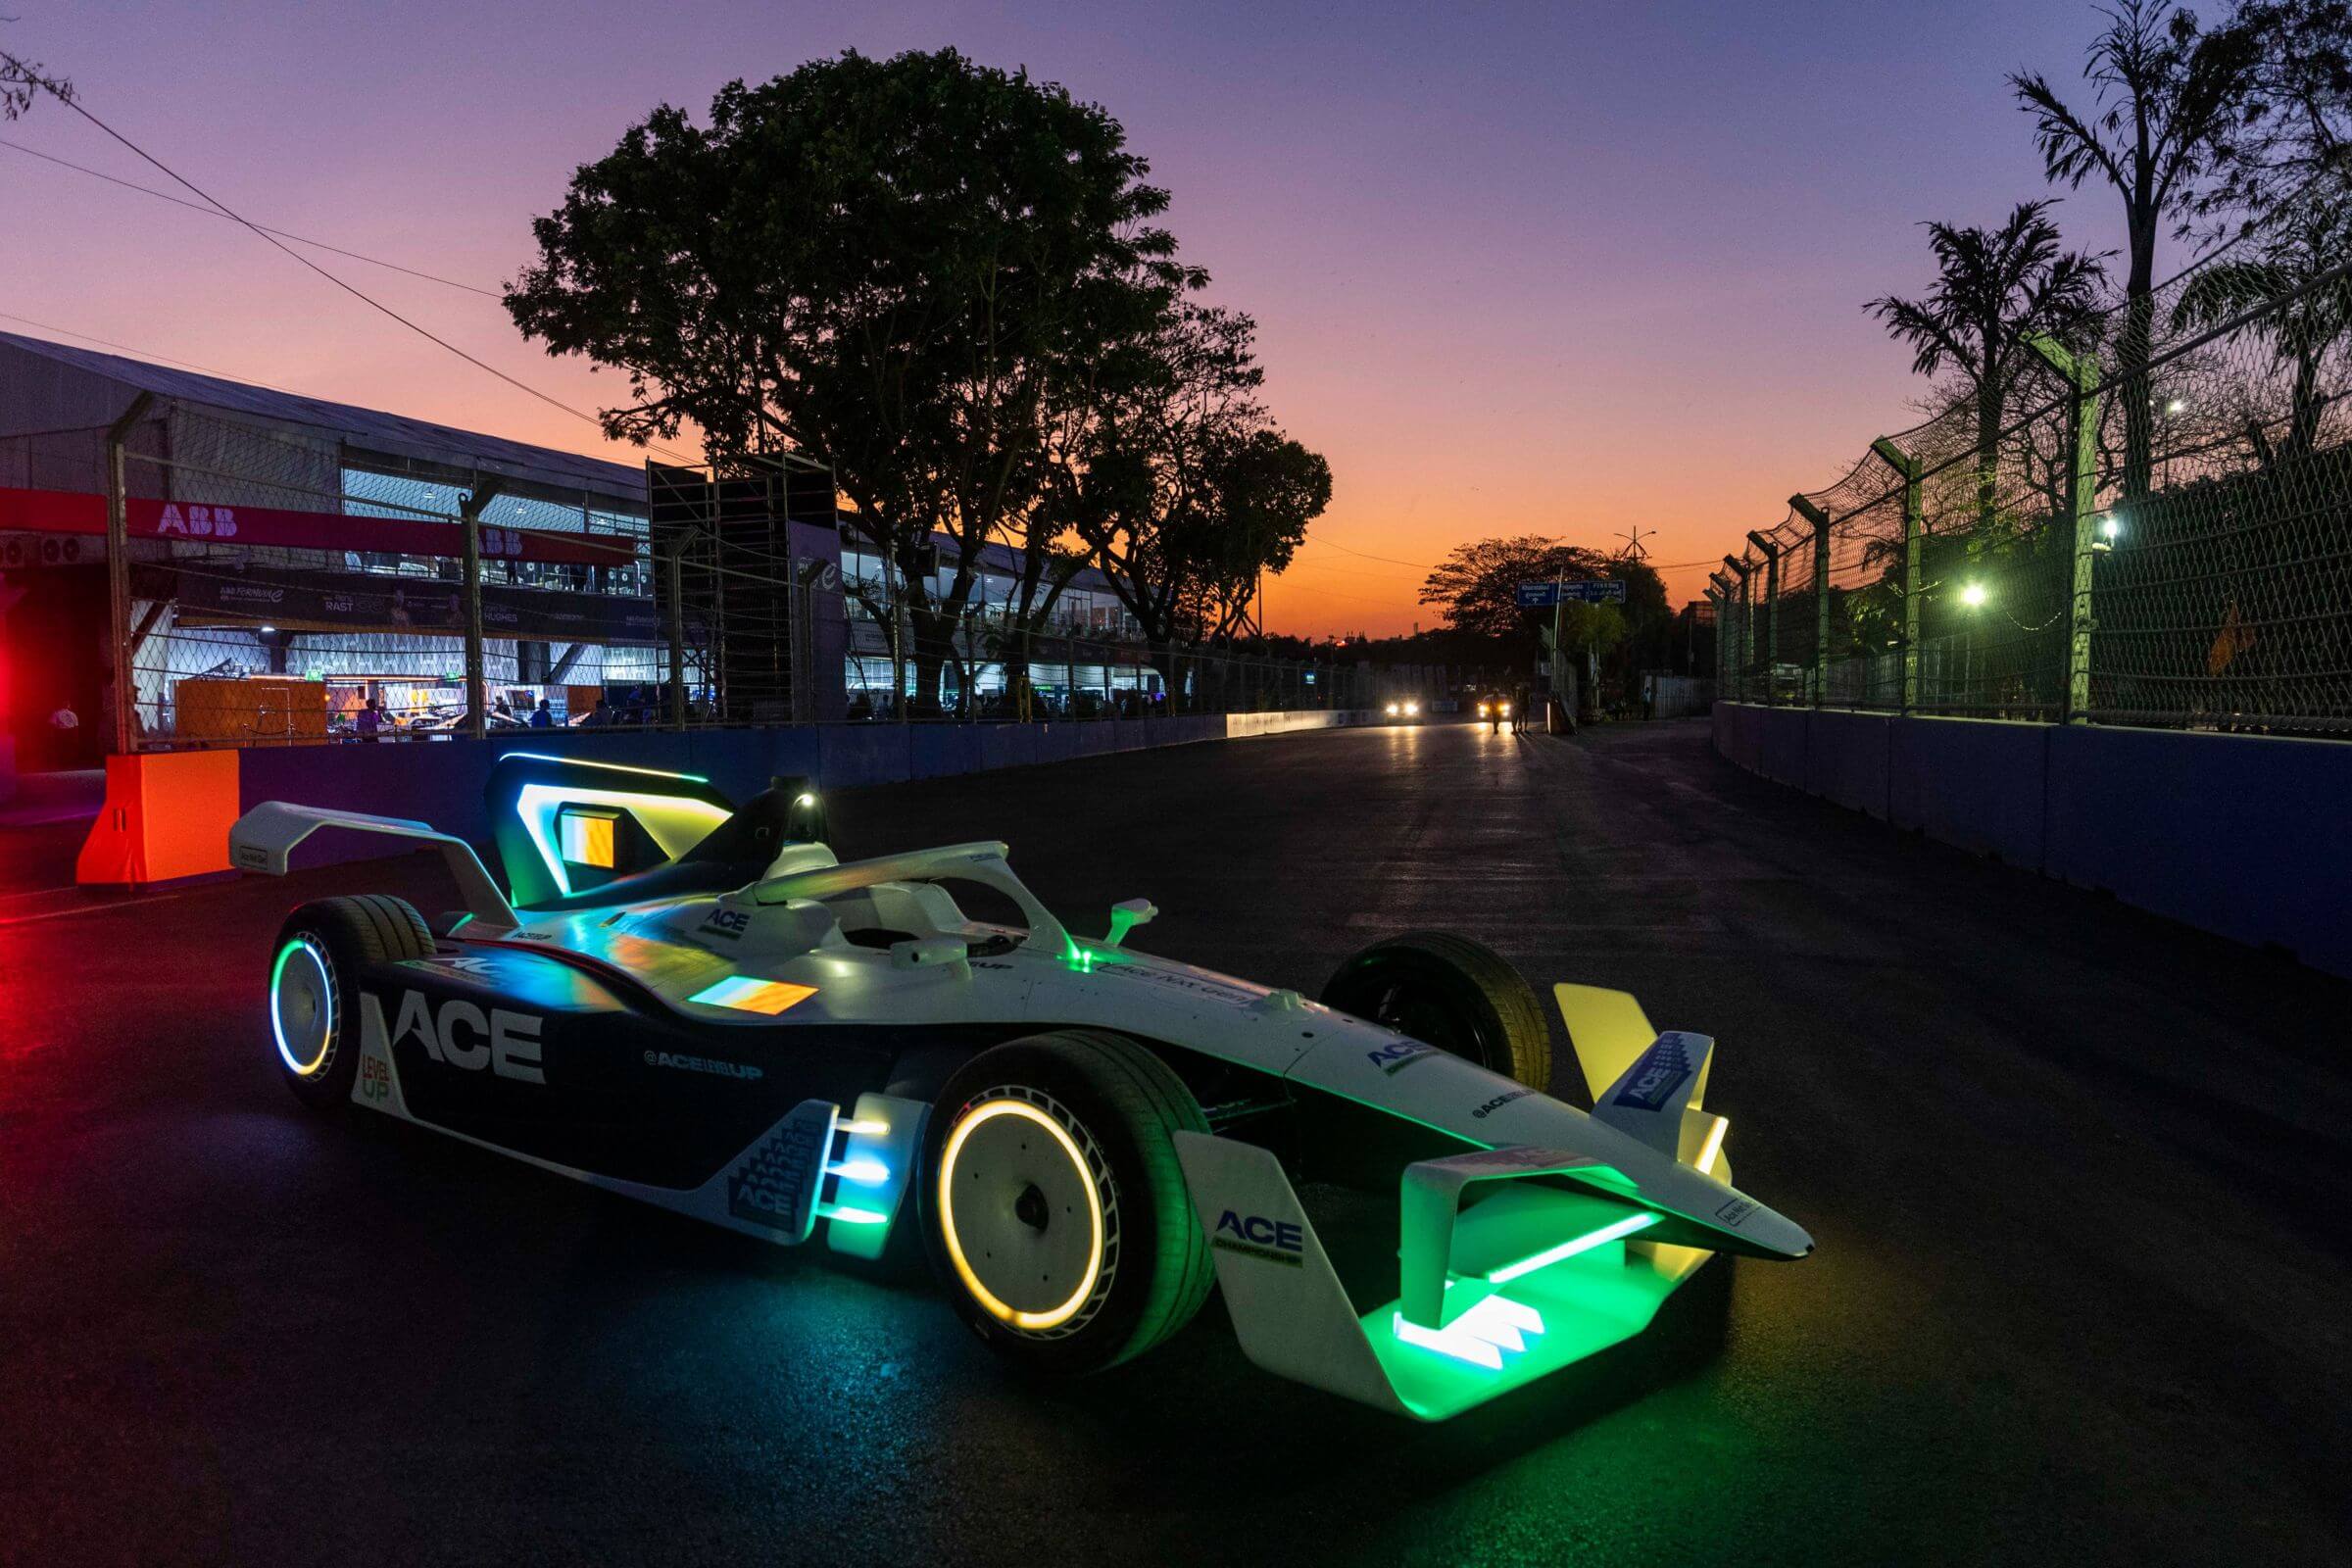 "ACE Championship": New electric junior series unveiled at Hyderabad E-Prix